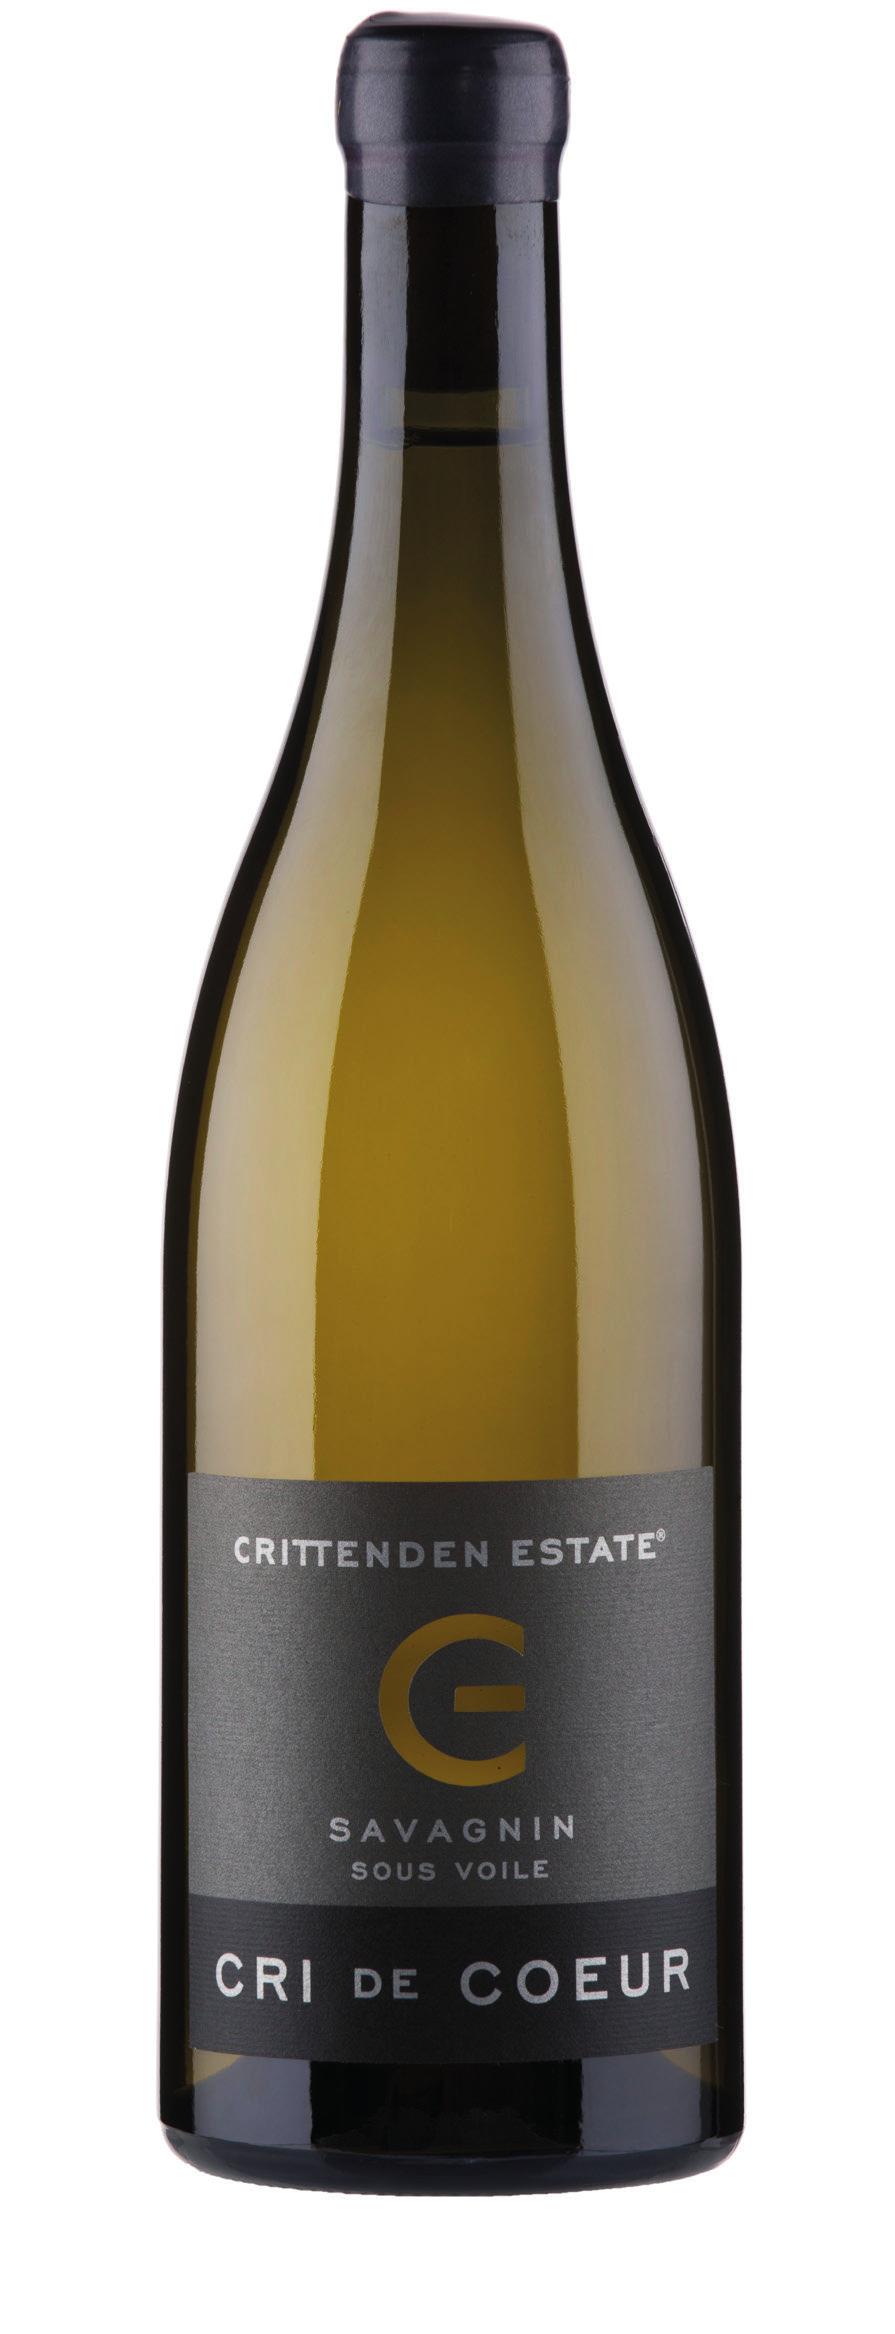 H A L L I D A Y 2 0 1 9 Crittenden Estate 2013 Cri de Coeur Savagnin In French, sous voile means under a veil and in this instance, it is flor yeast keeping the wine protected and